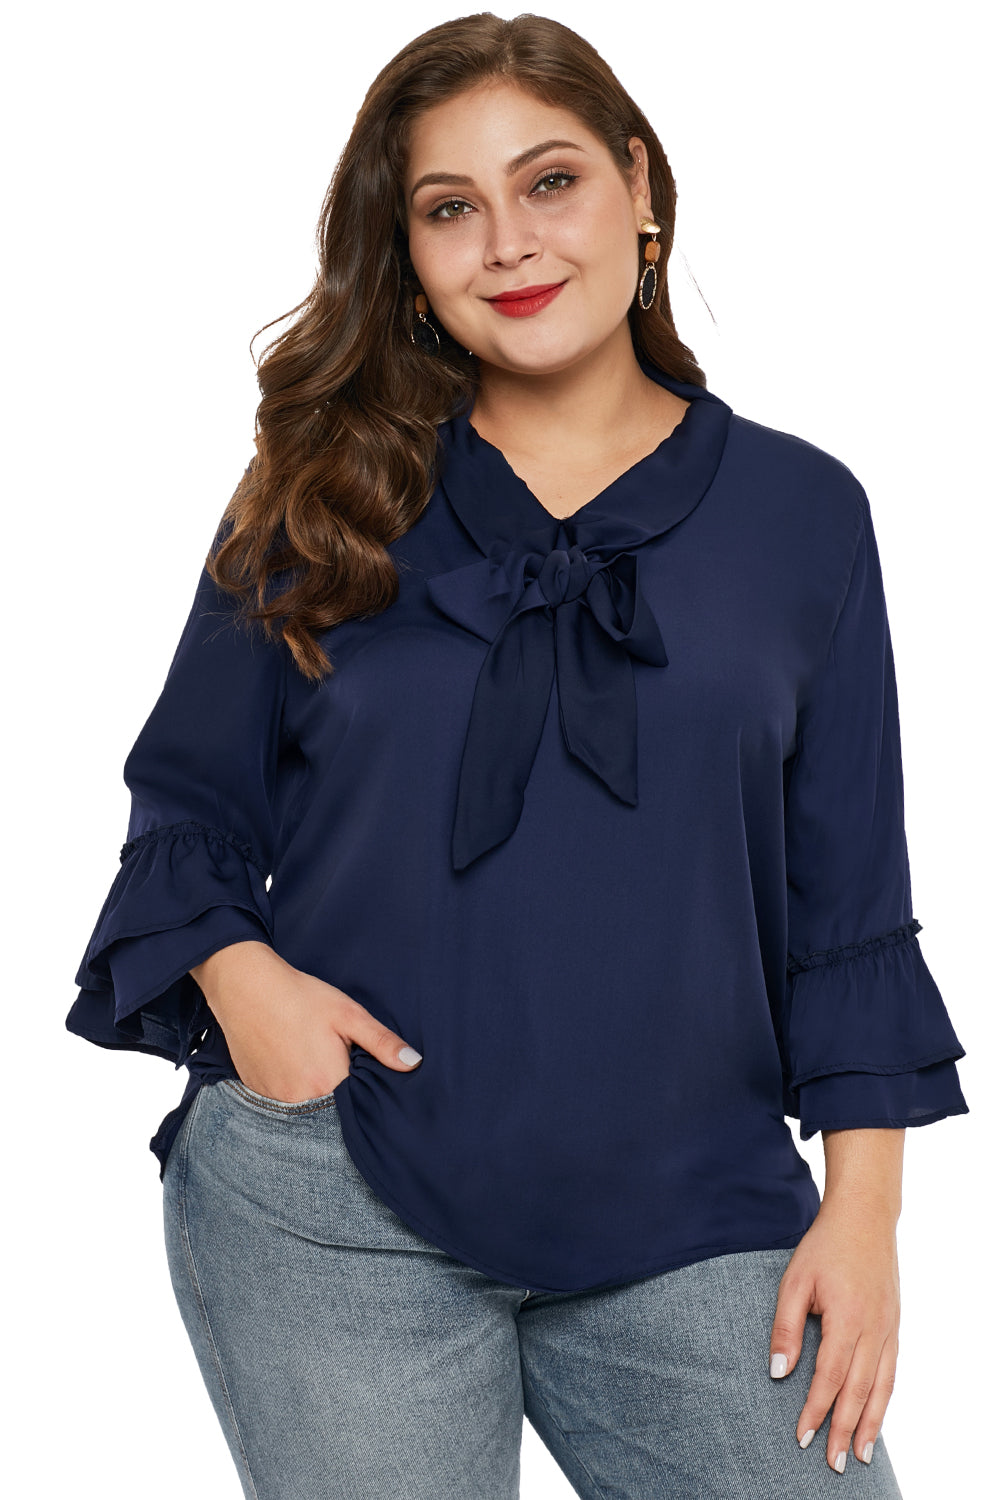 Navy Blue Tie Neck Ruffle Sleeved Plus Size Blouse